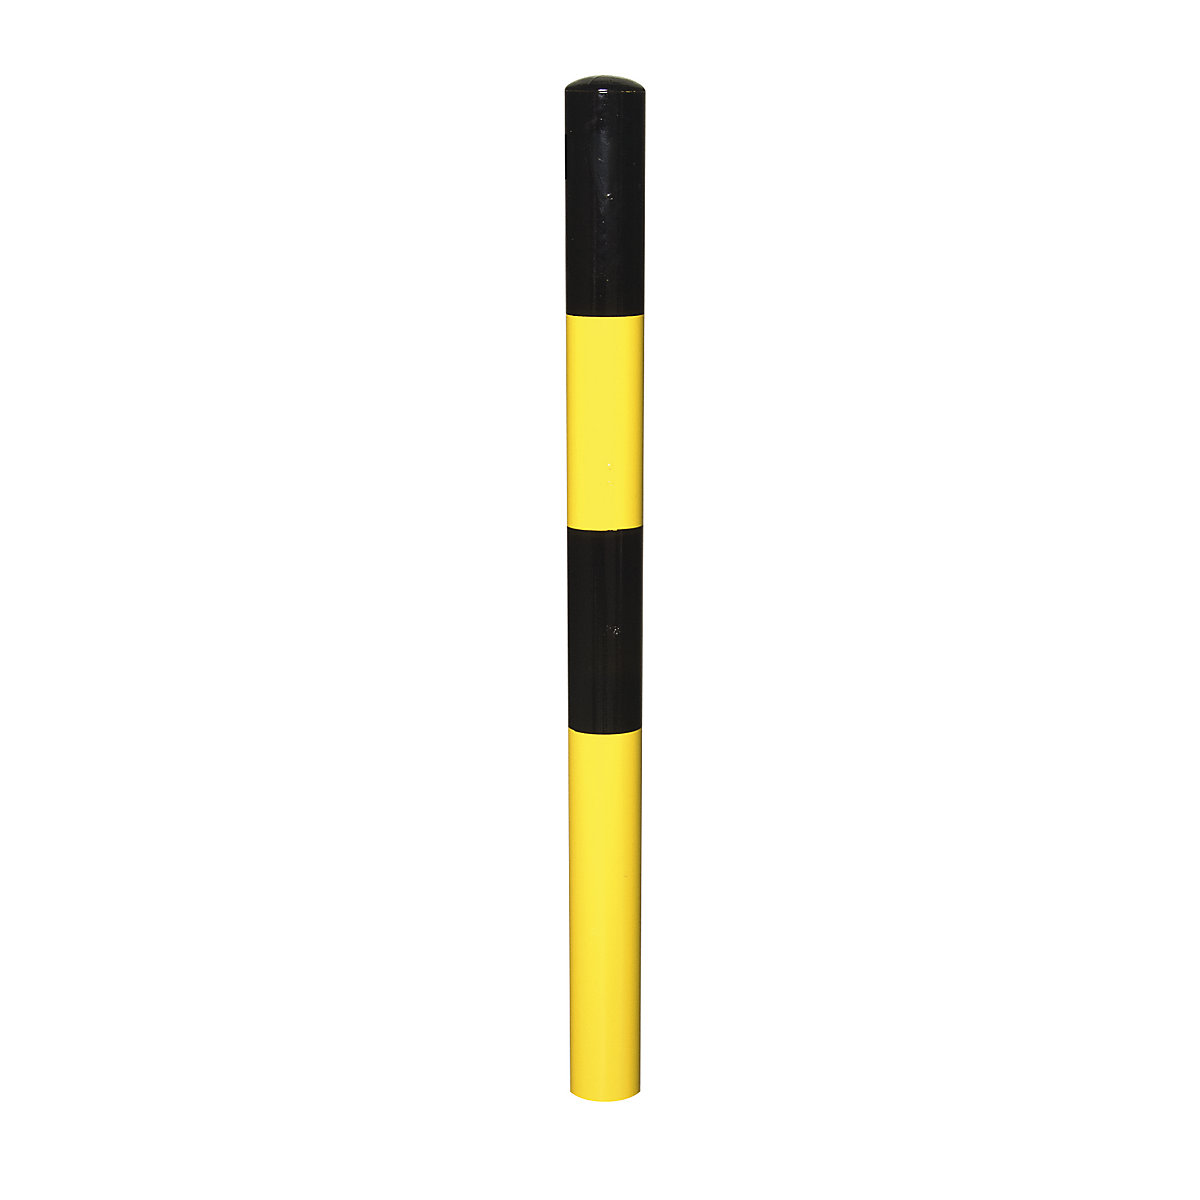 Barrier post, for setting in concrete, Ø 76 mm, painted black/yellow, 1 eyelet-8